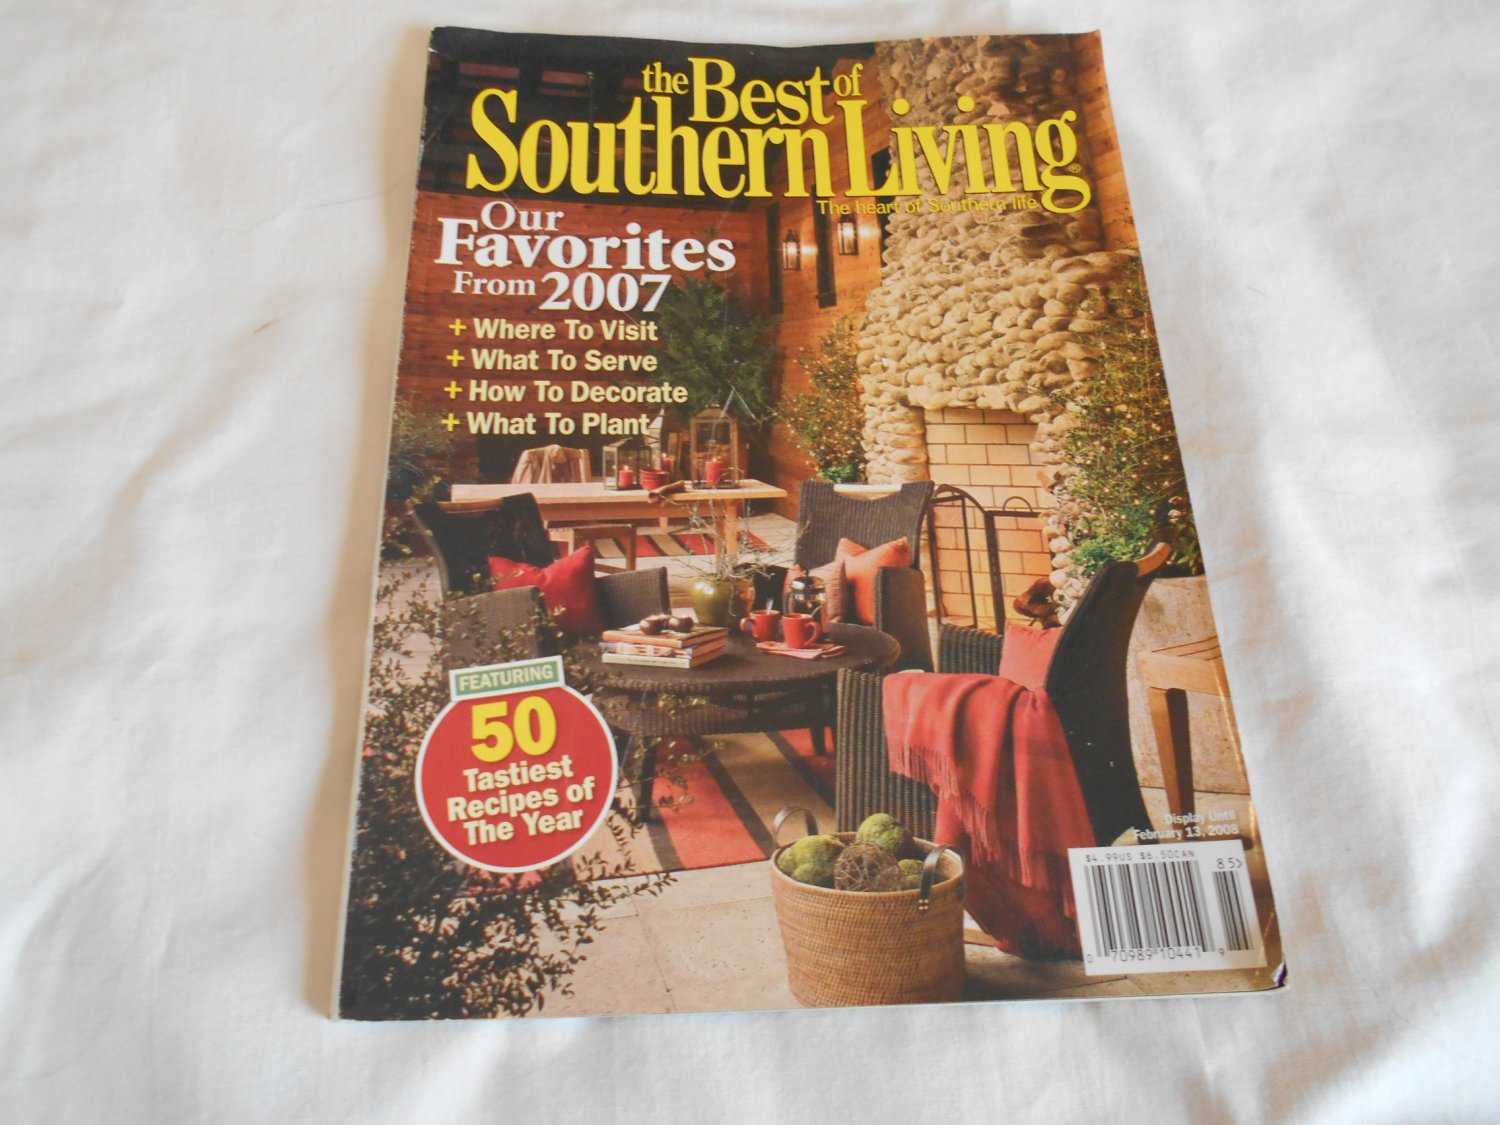 The Best of Southern Living 2007 (February 13, 2008)